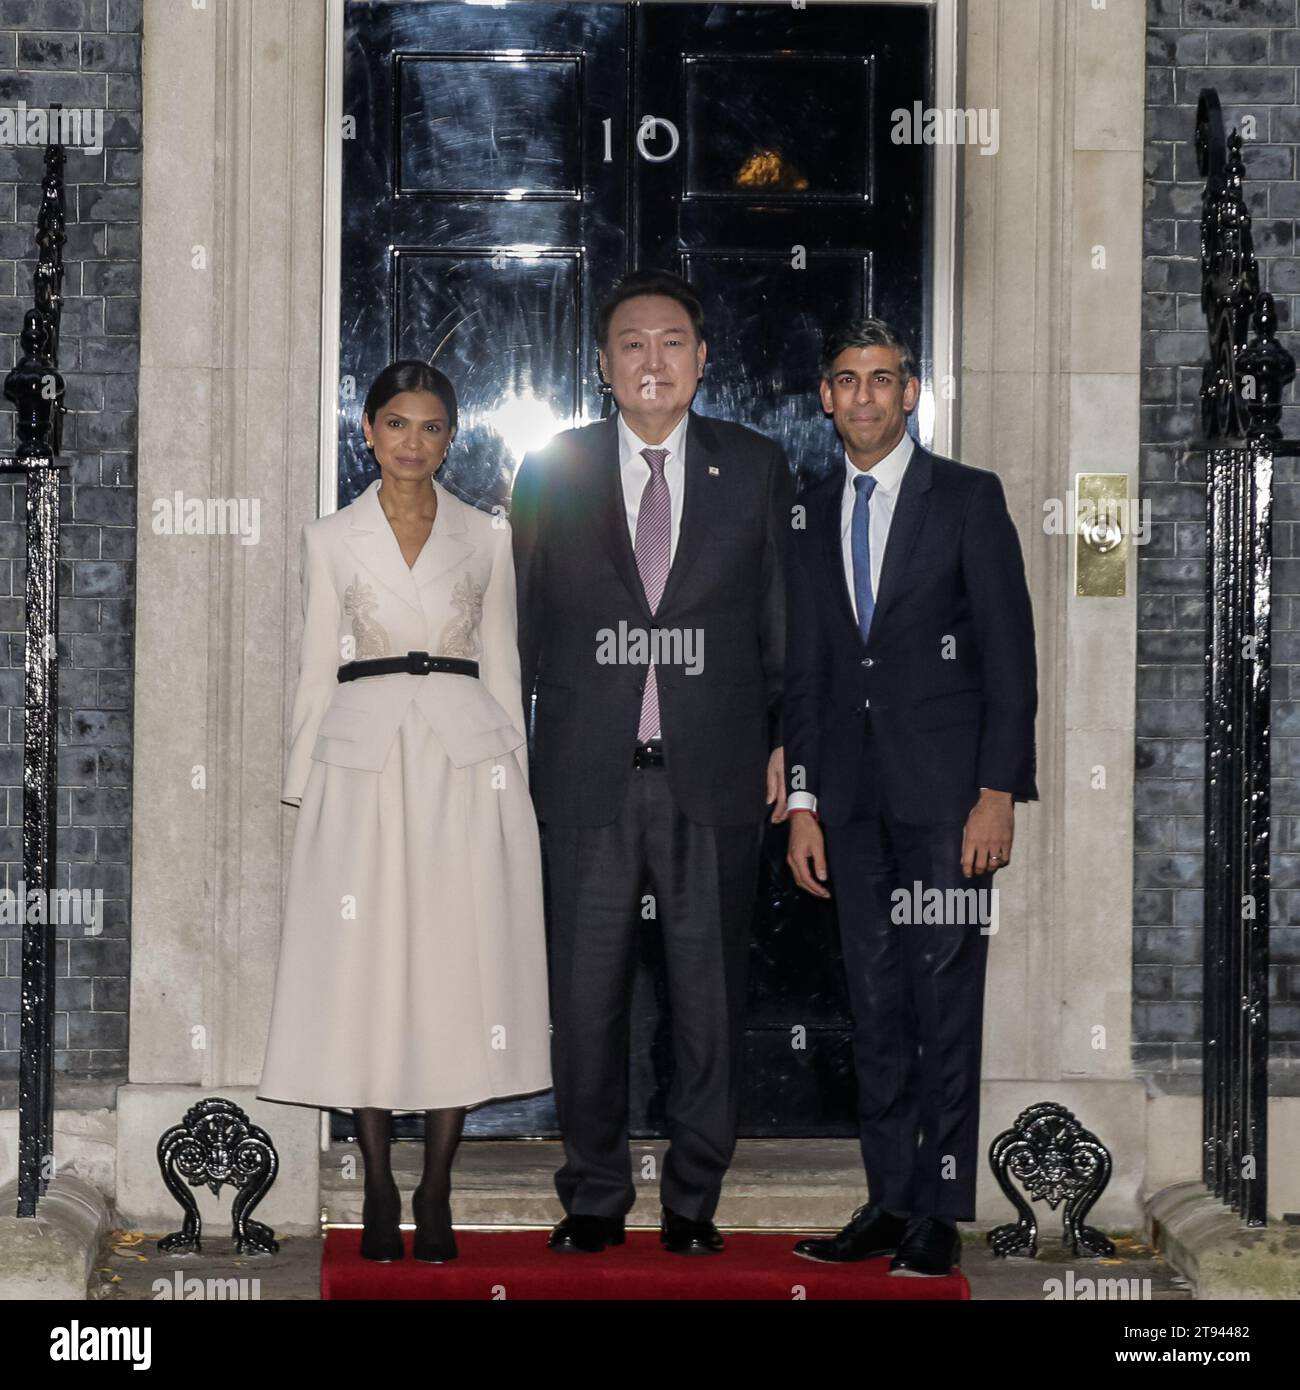 London, UK. 22nd Nov, 2023. Rishi Sunak, British Prime Minister, together with his wife Akshata Murty, welcomes the President of the Republic of Korea, His Excellency Yoon Suk Yeol, to 10 Downing Street as part of their State Visit to the UK. Credit: Imageplotter/Alamy Live News Stock Photo